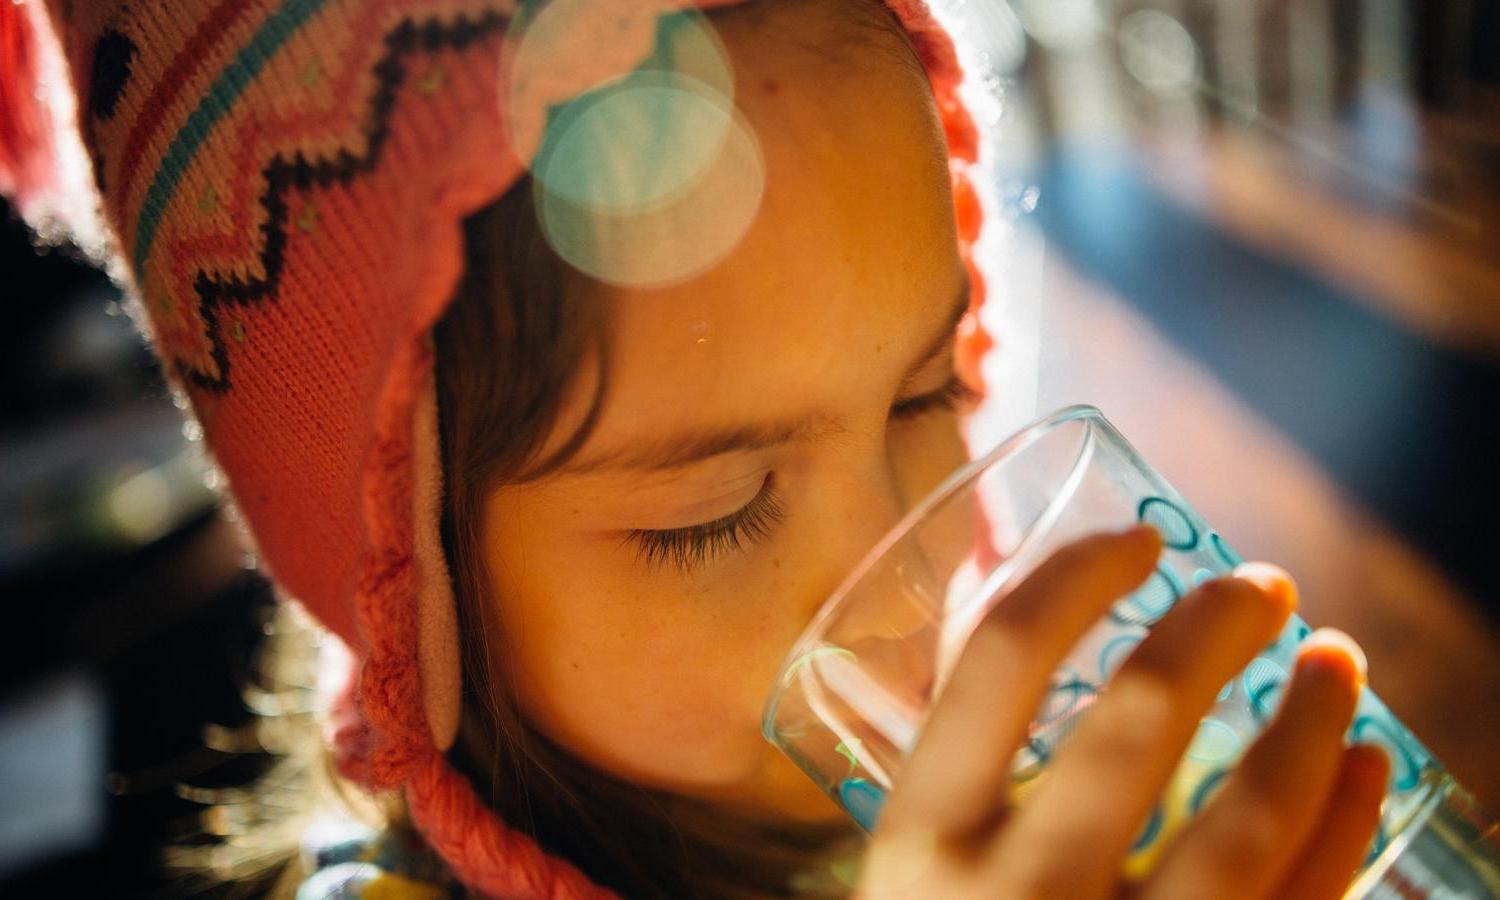 A kid drinks a glass of water.